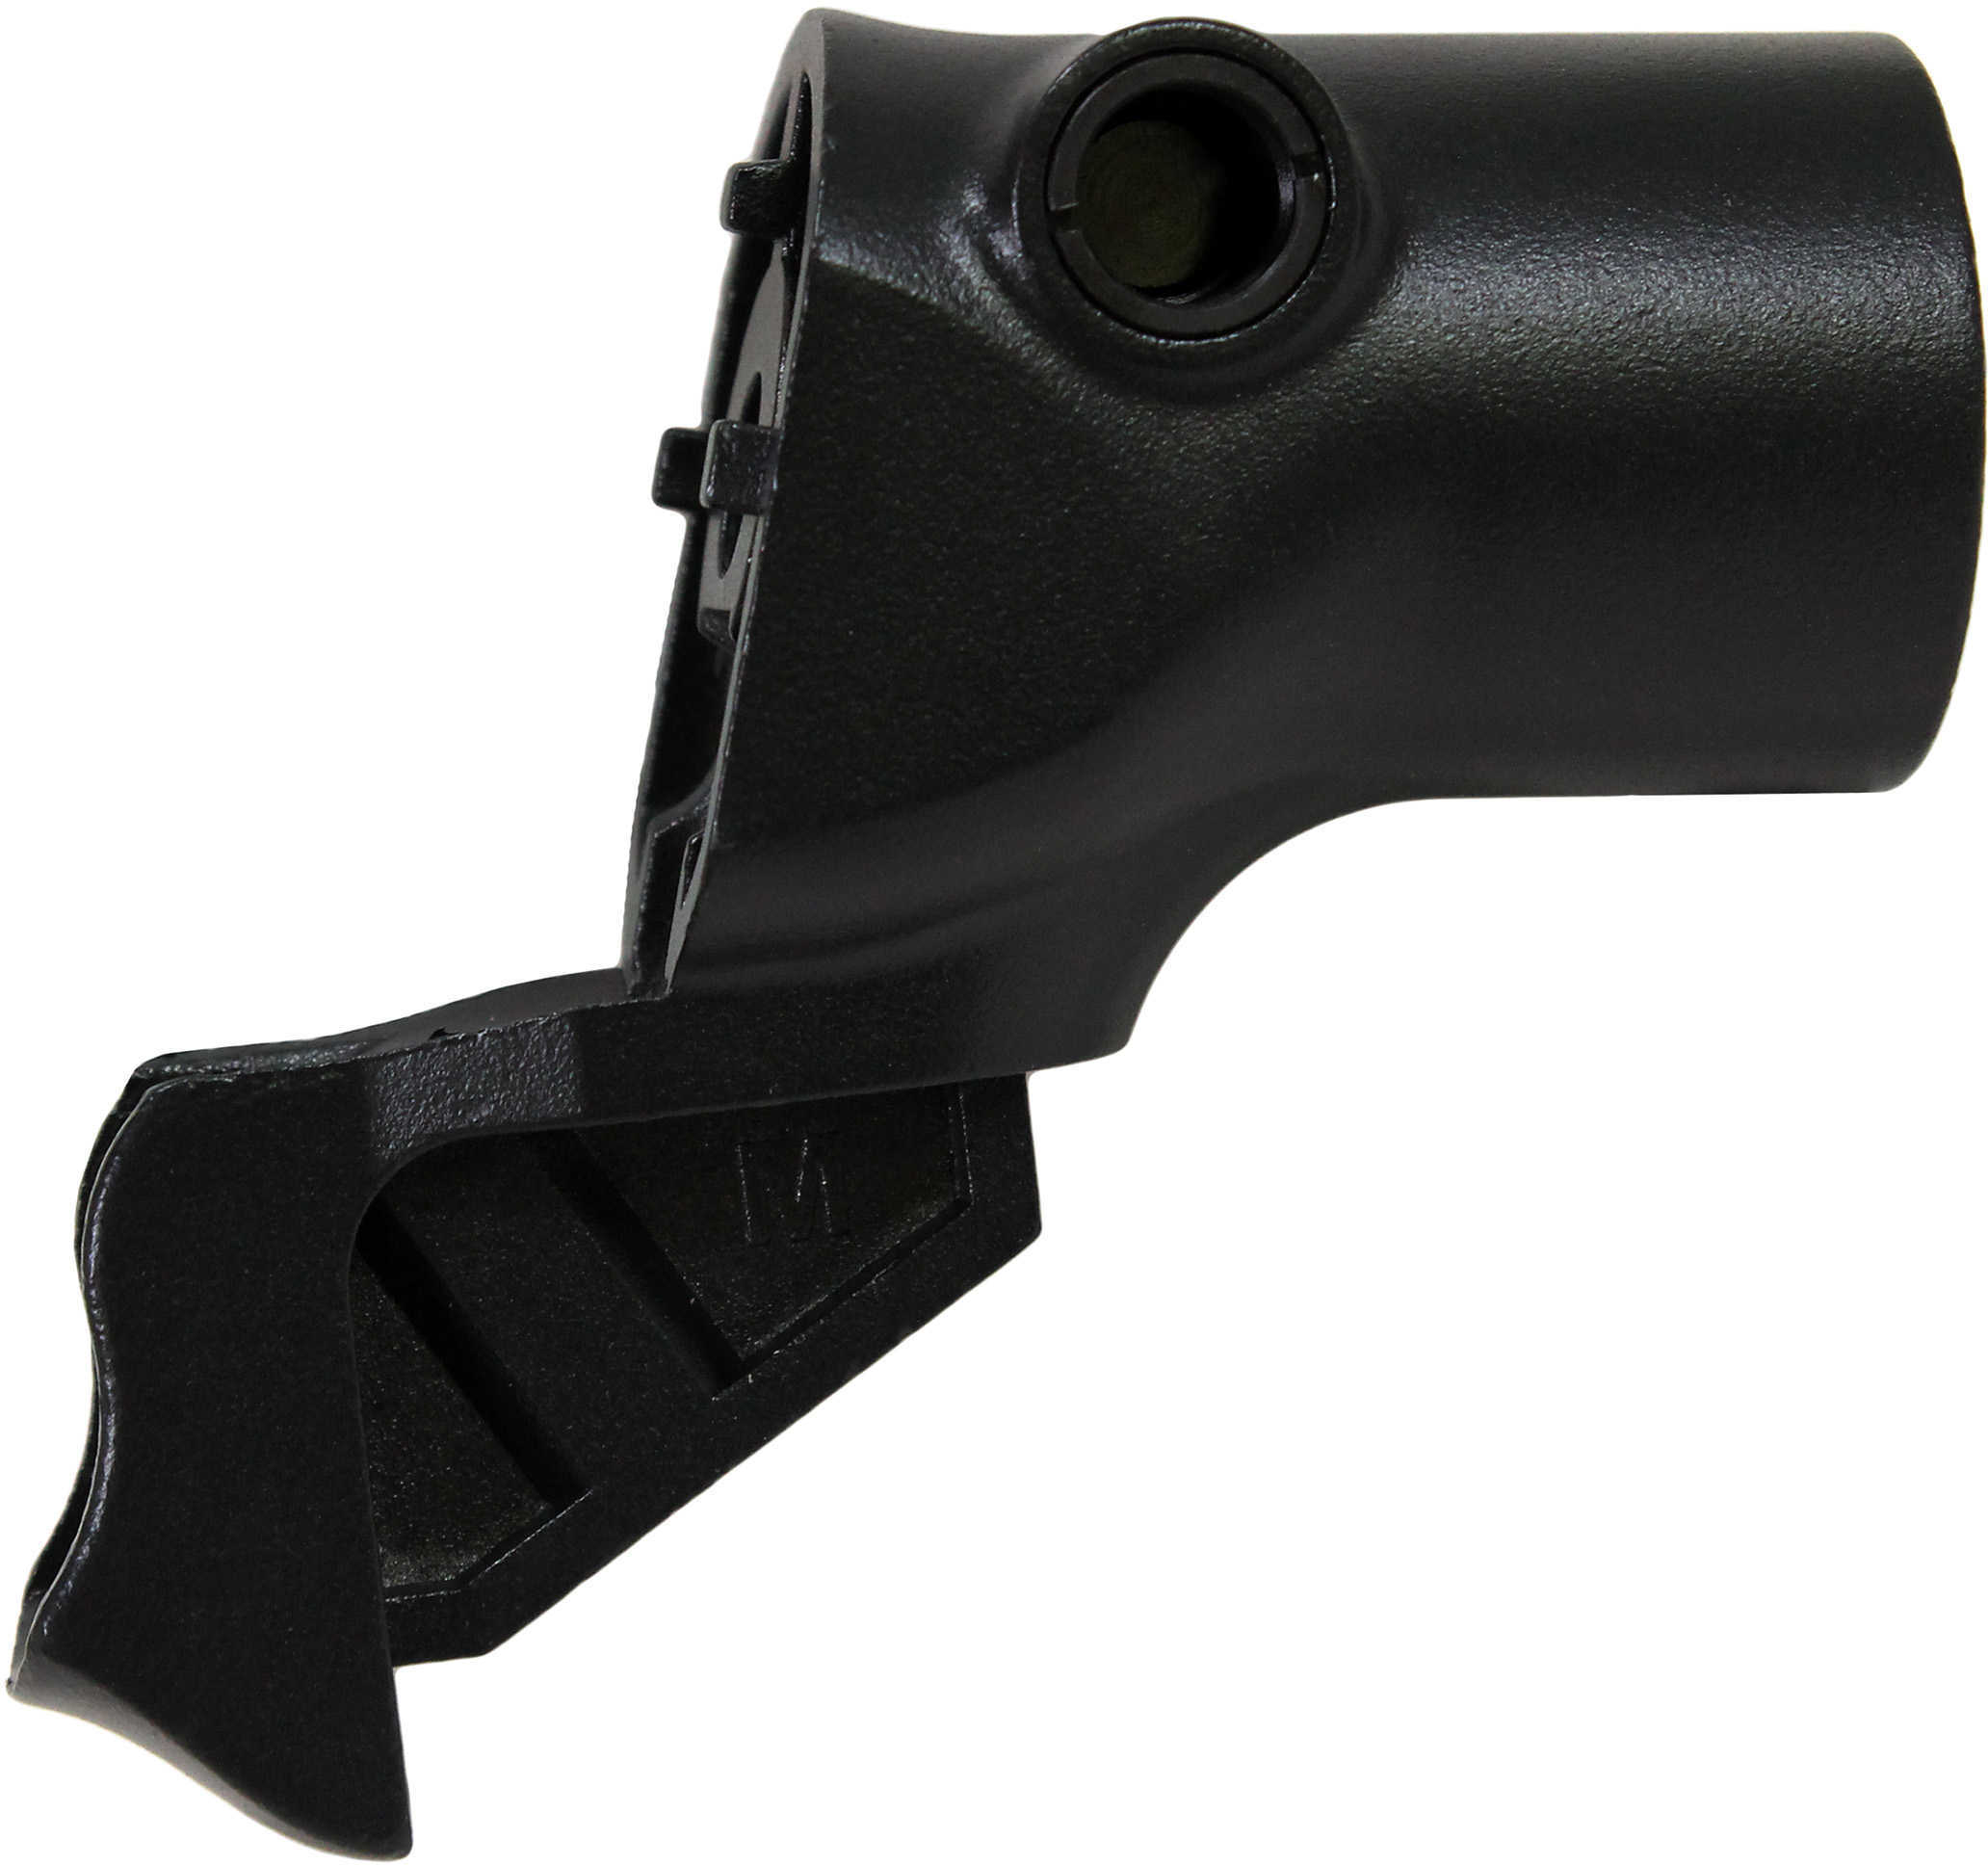 TACSTAR Stock Adapter To Mil- Spec AR-15 For M-Berg 500 12Ga